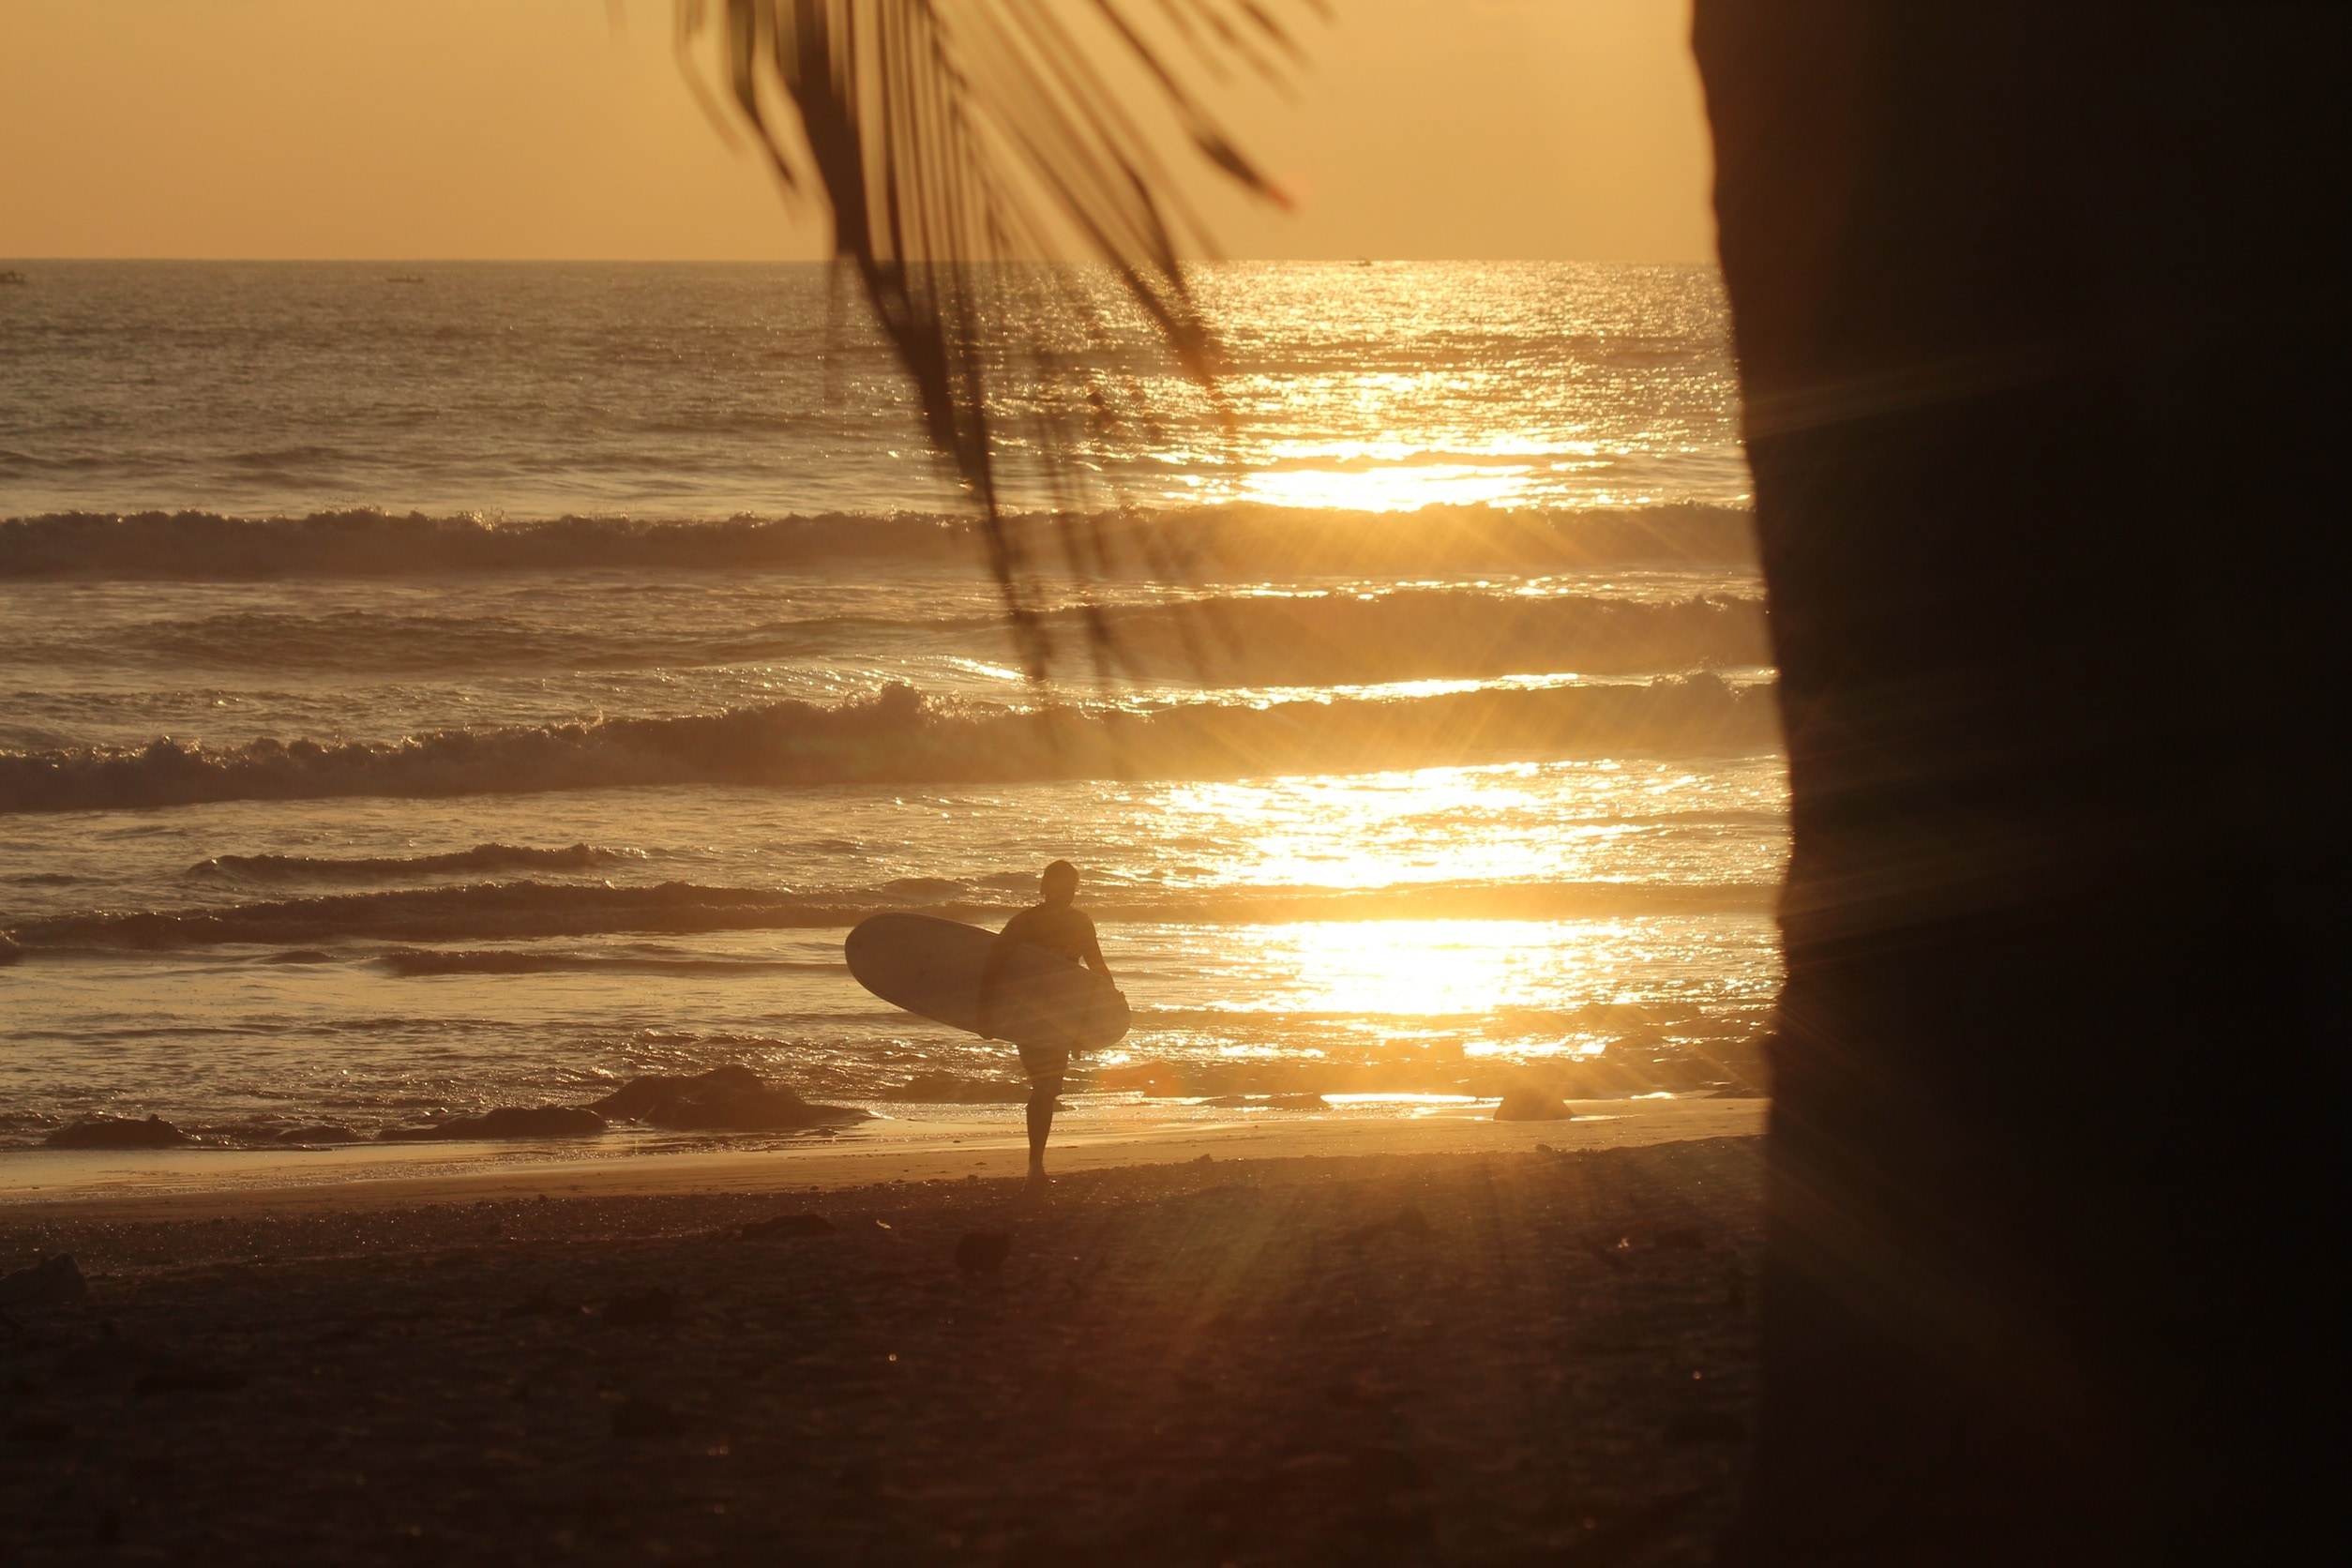 silhouette of person holding surfboard